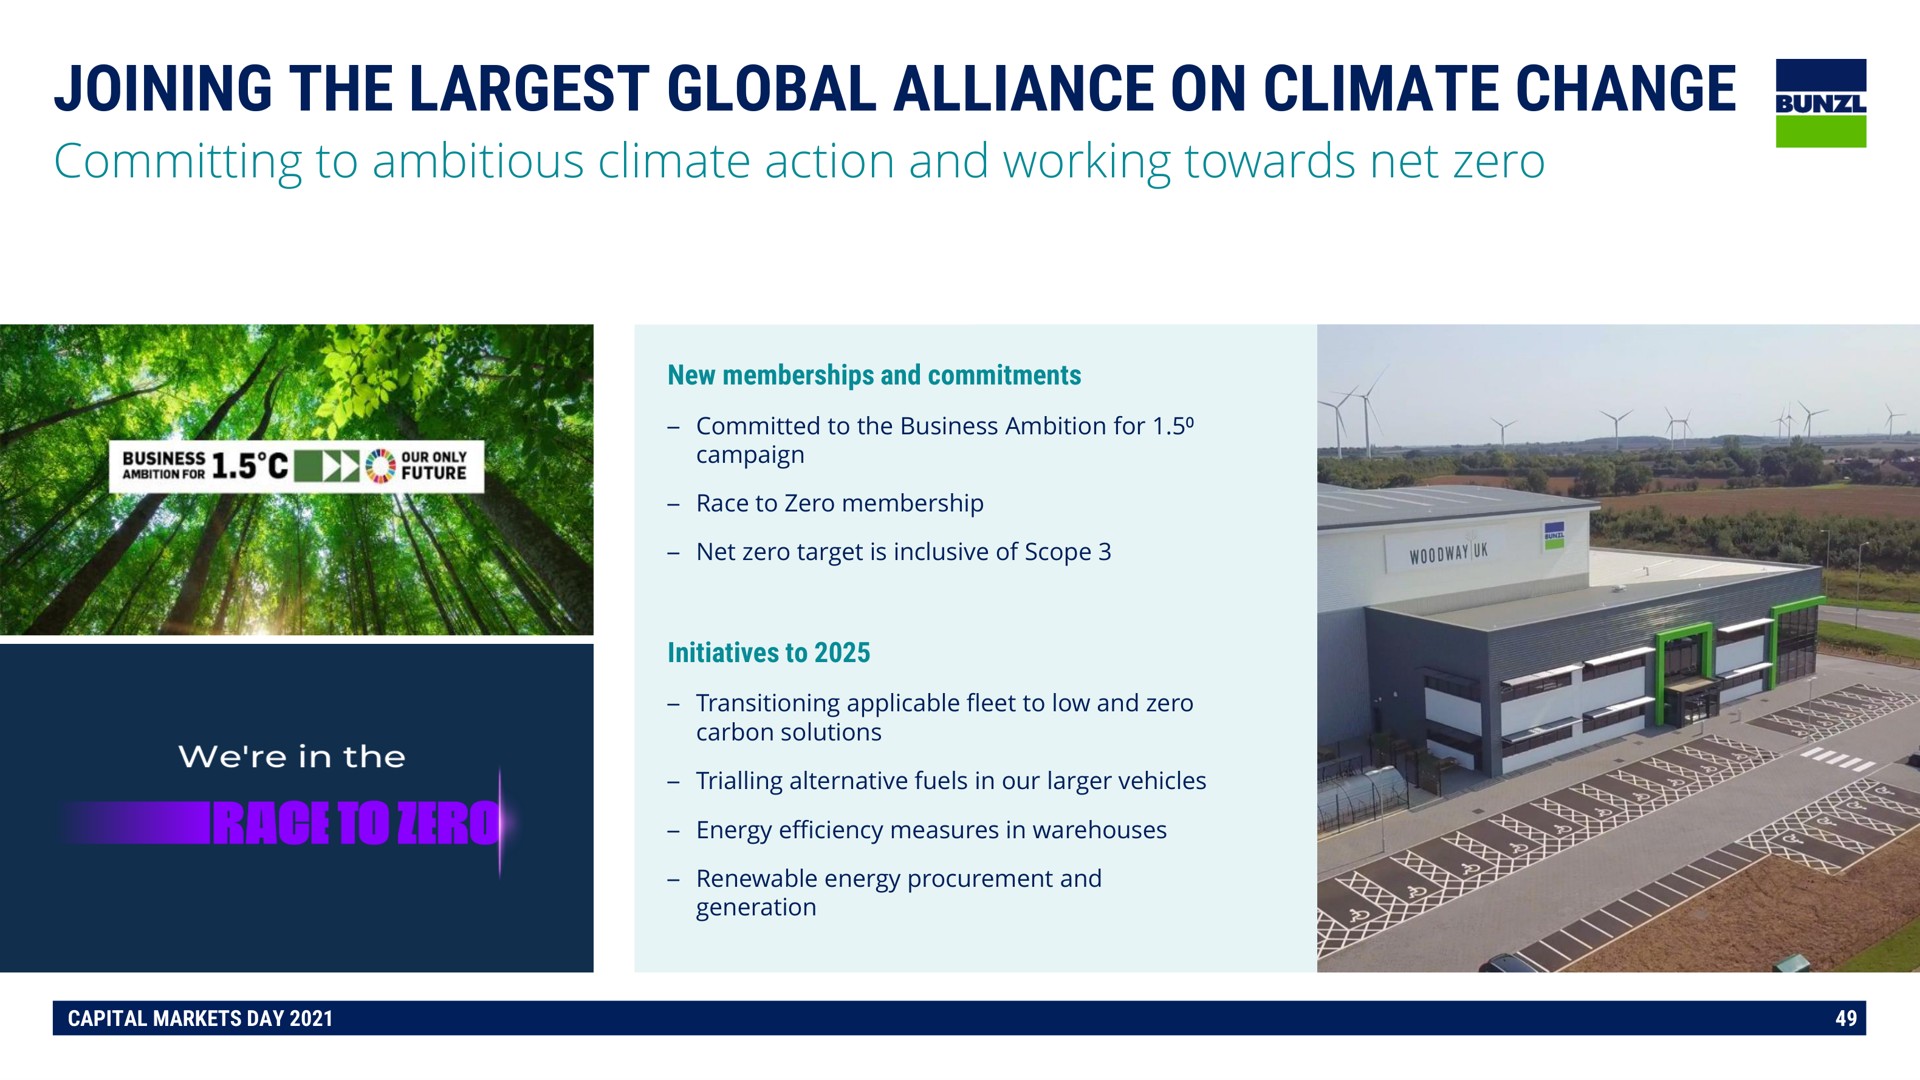 joining the global alliance on climate change pone | Bunzl